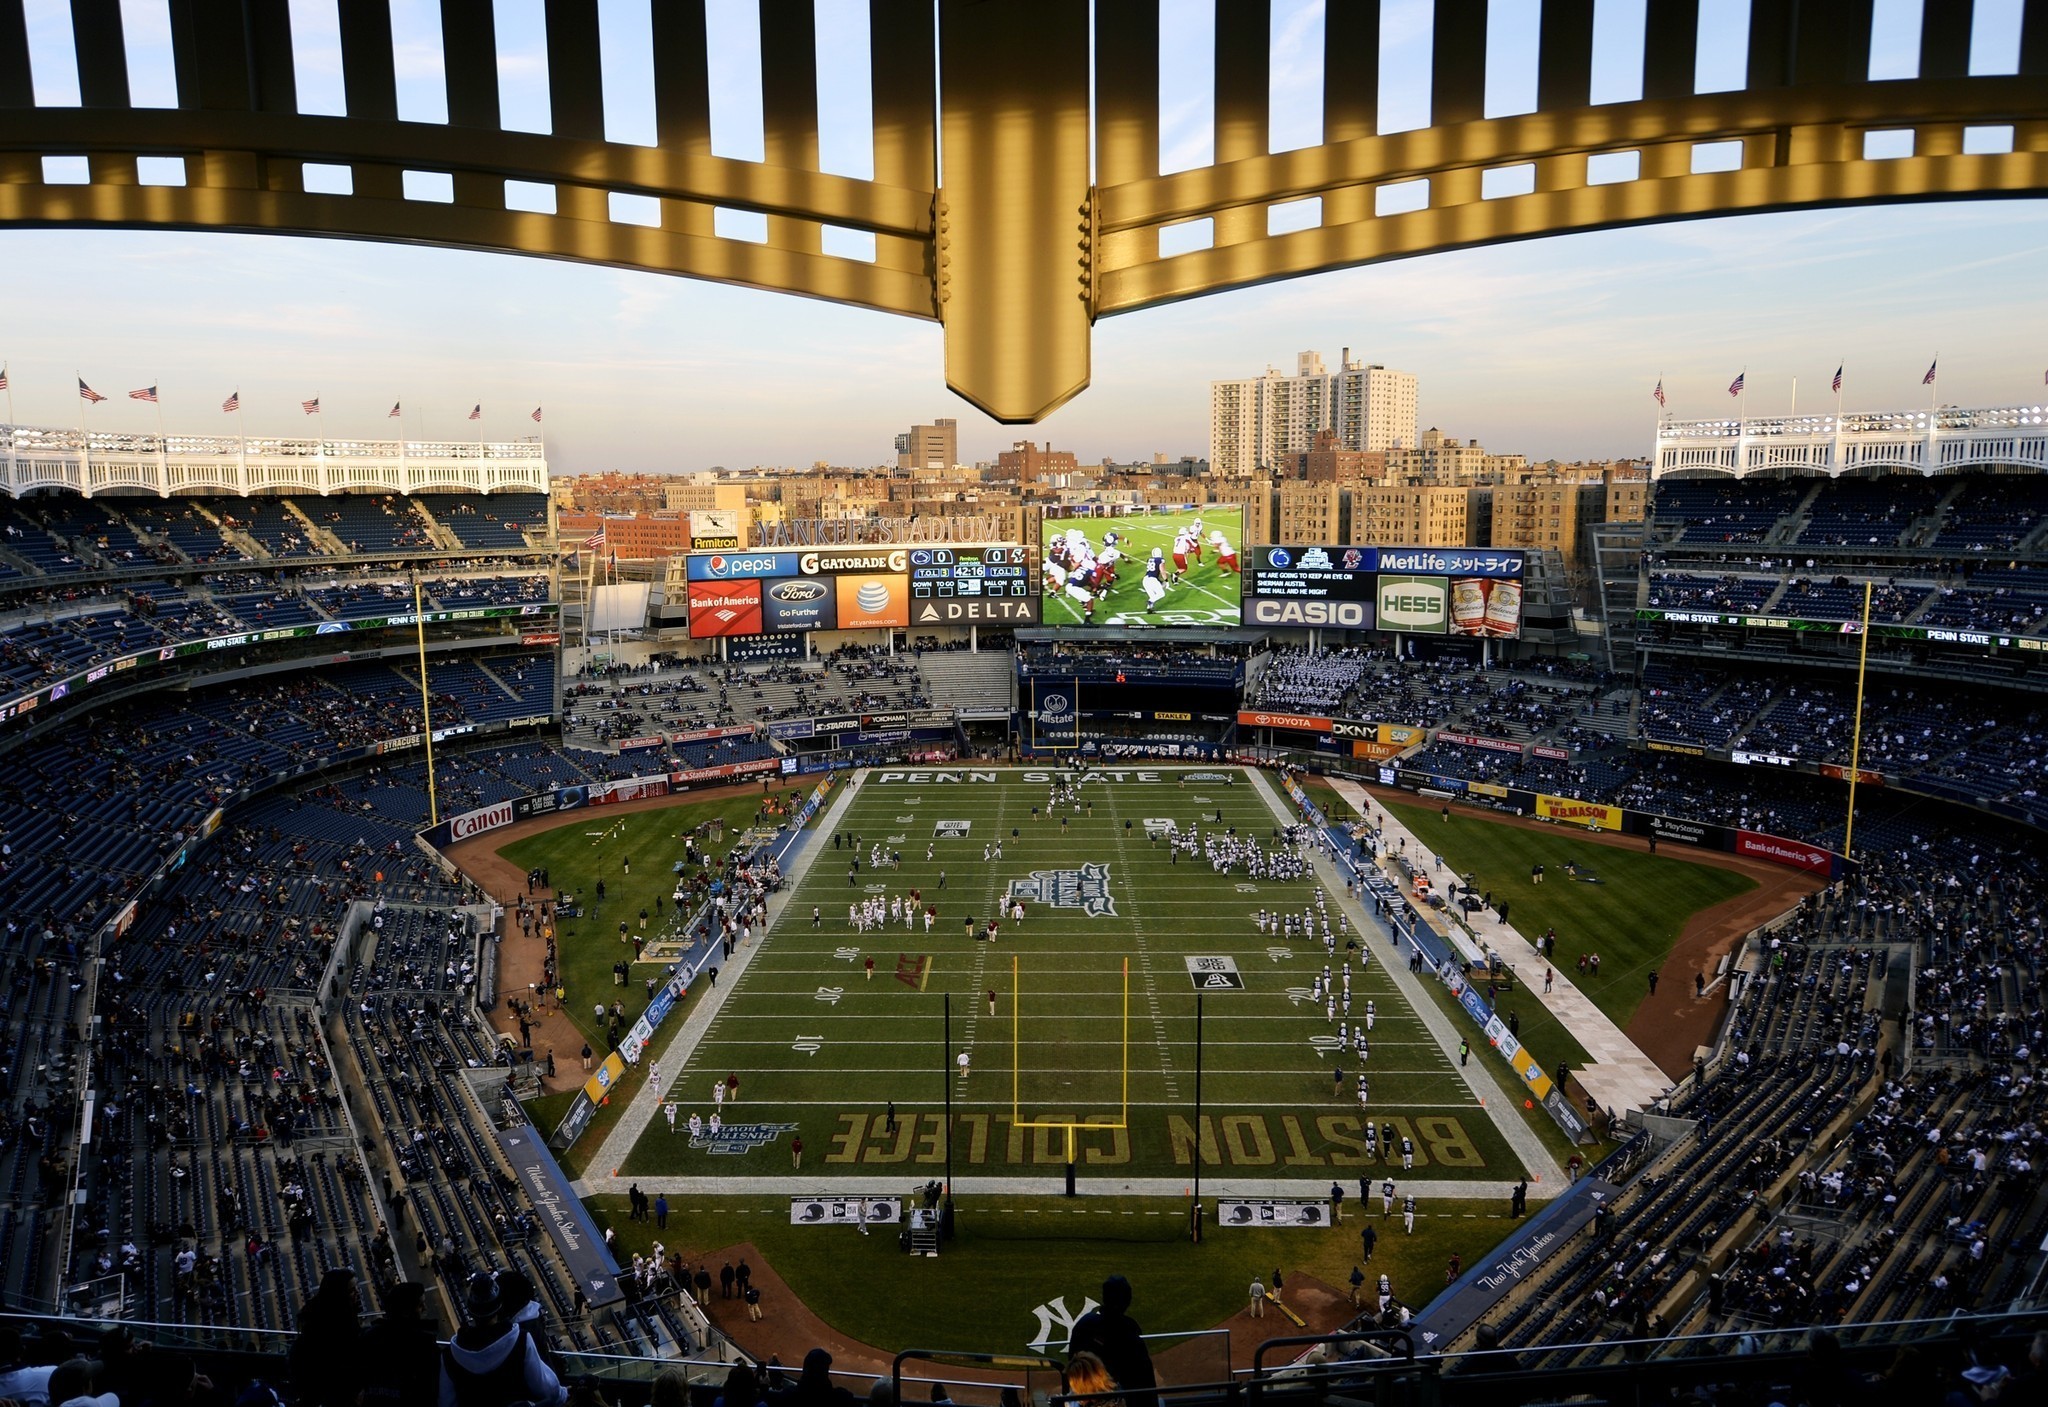 PICTURES: Penn State takes on Boston College in the Pinstripe Bowl